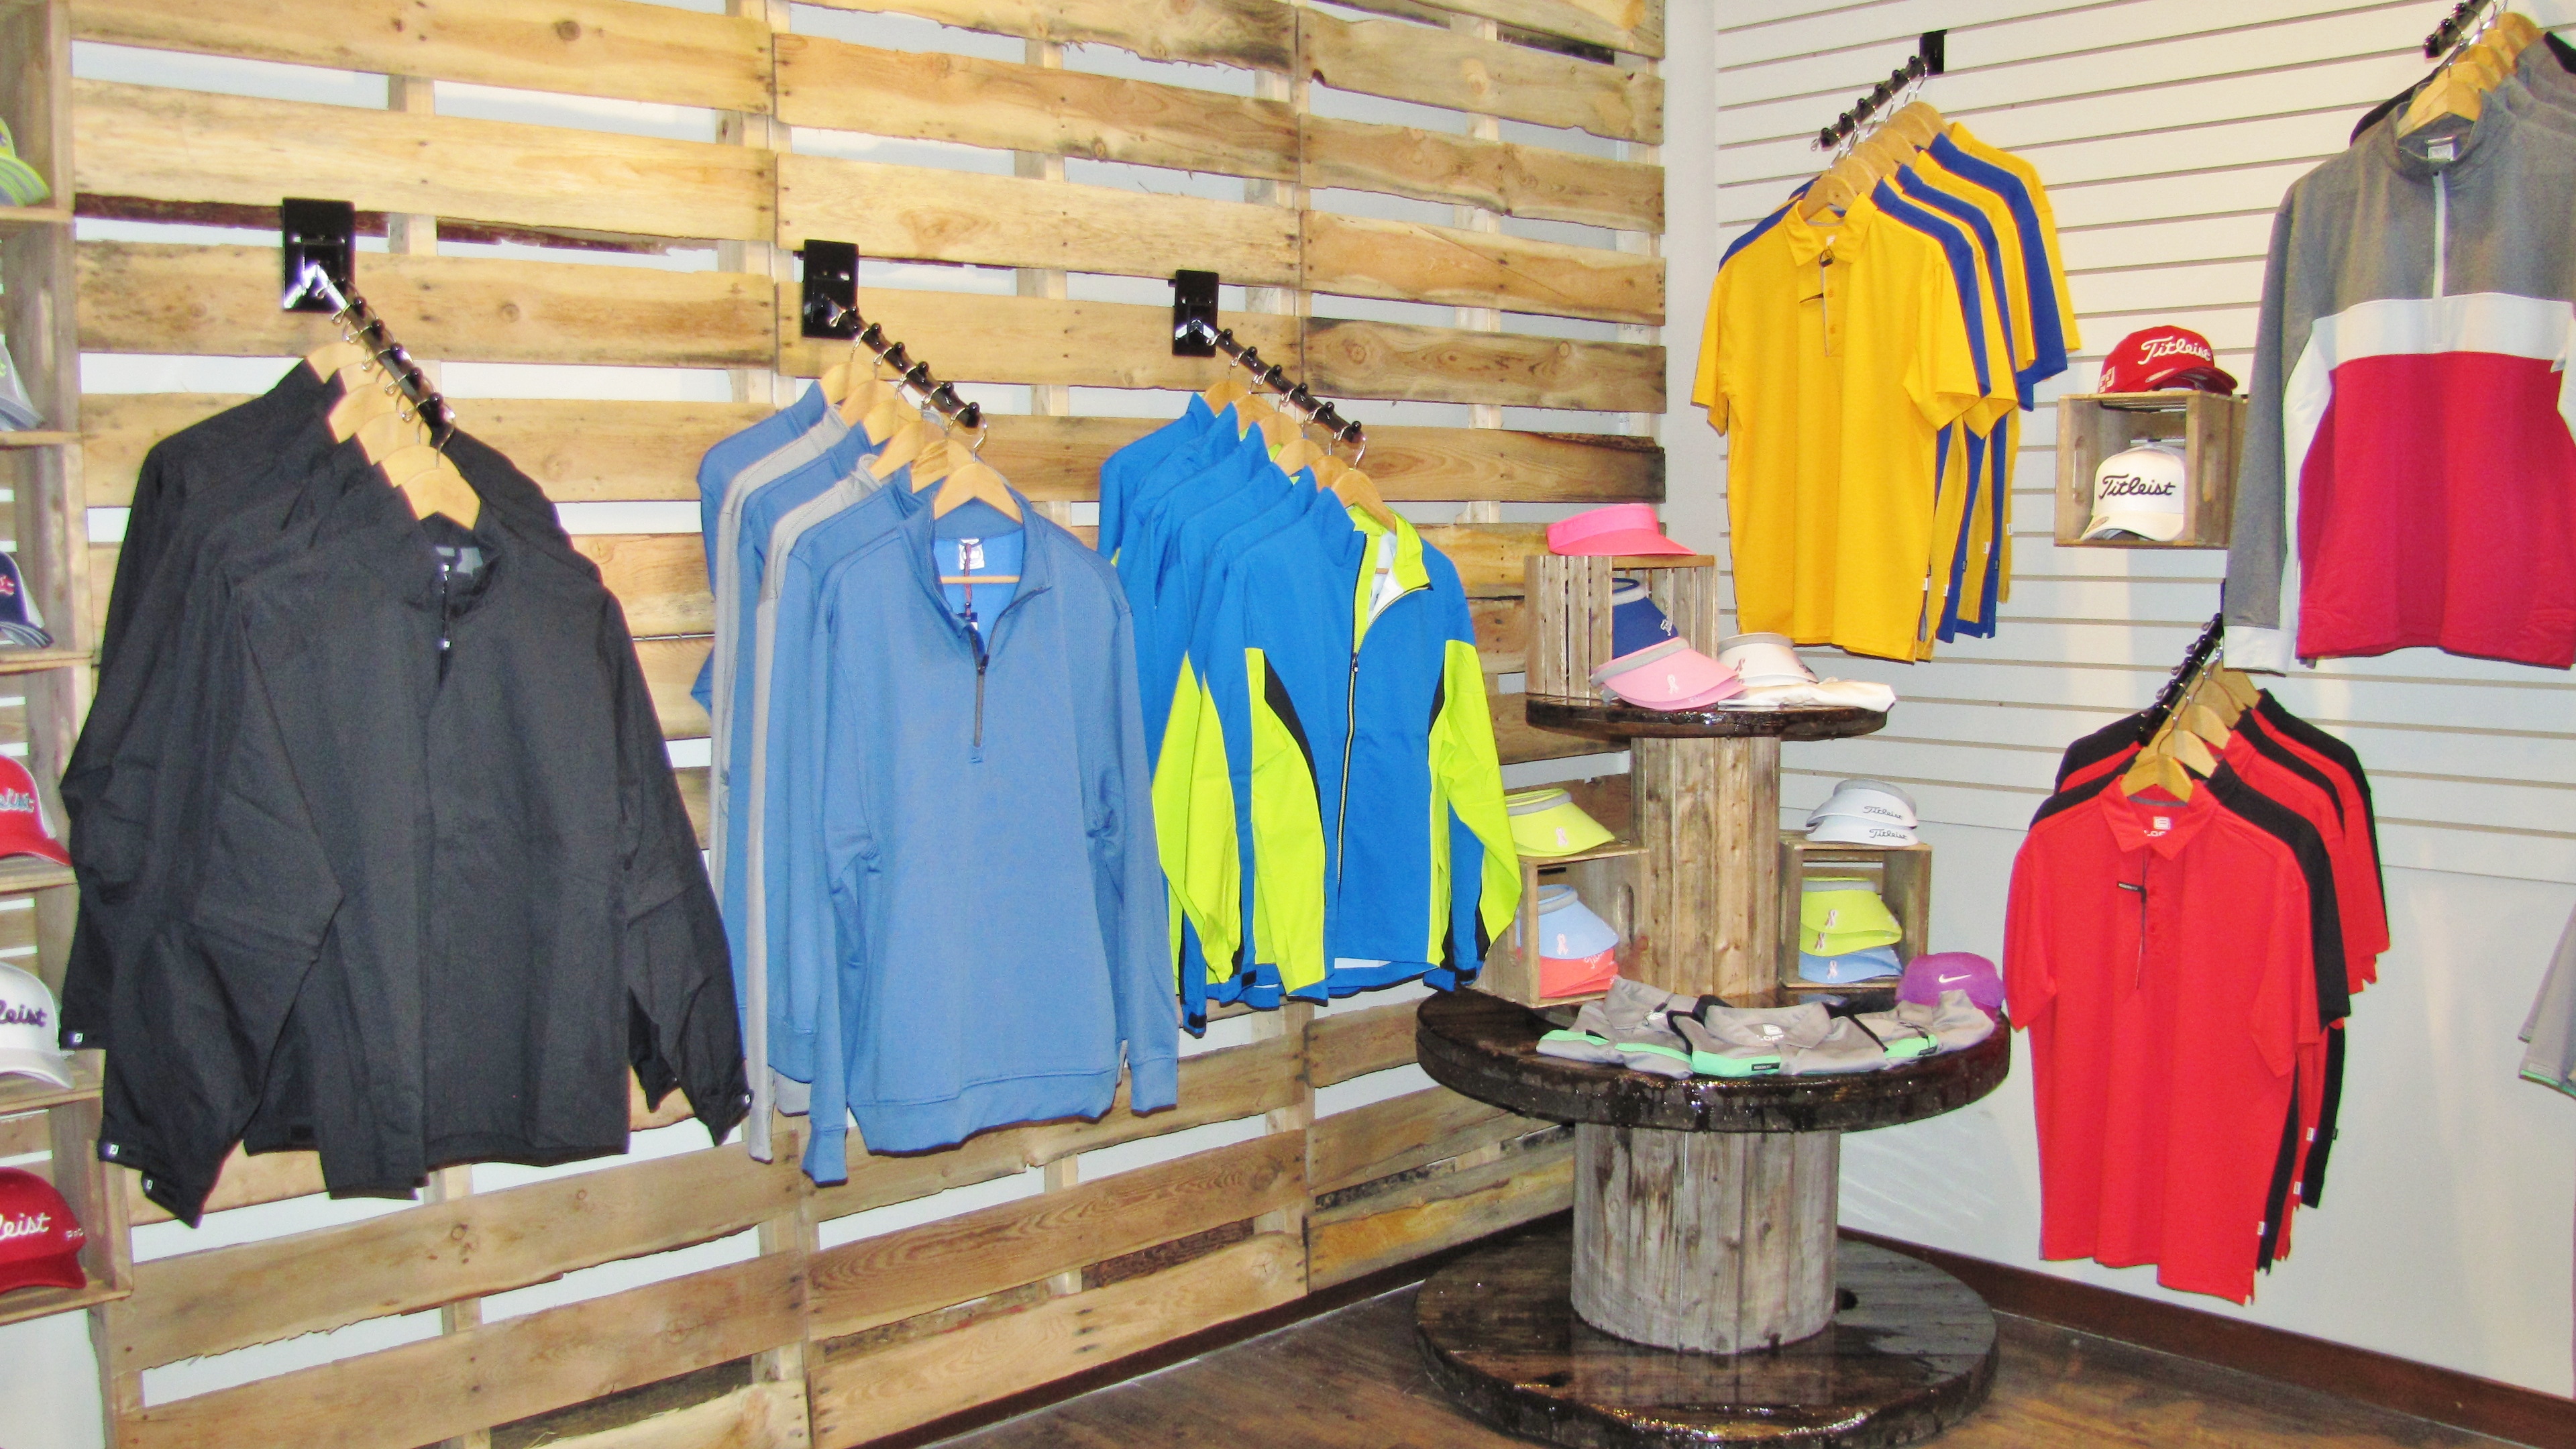 Redwoods shop with clothing on display